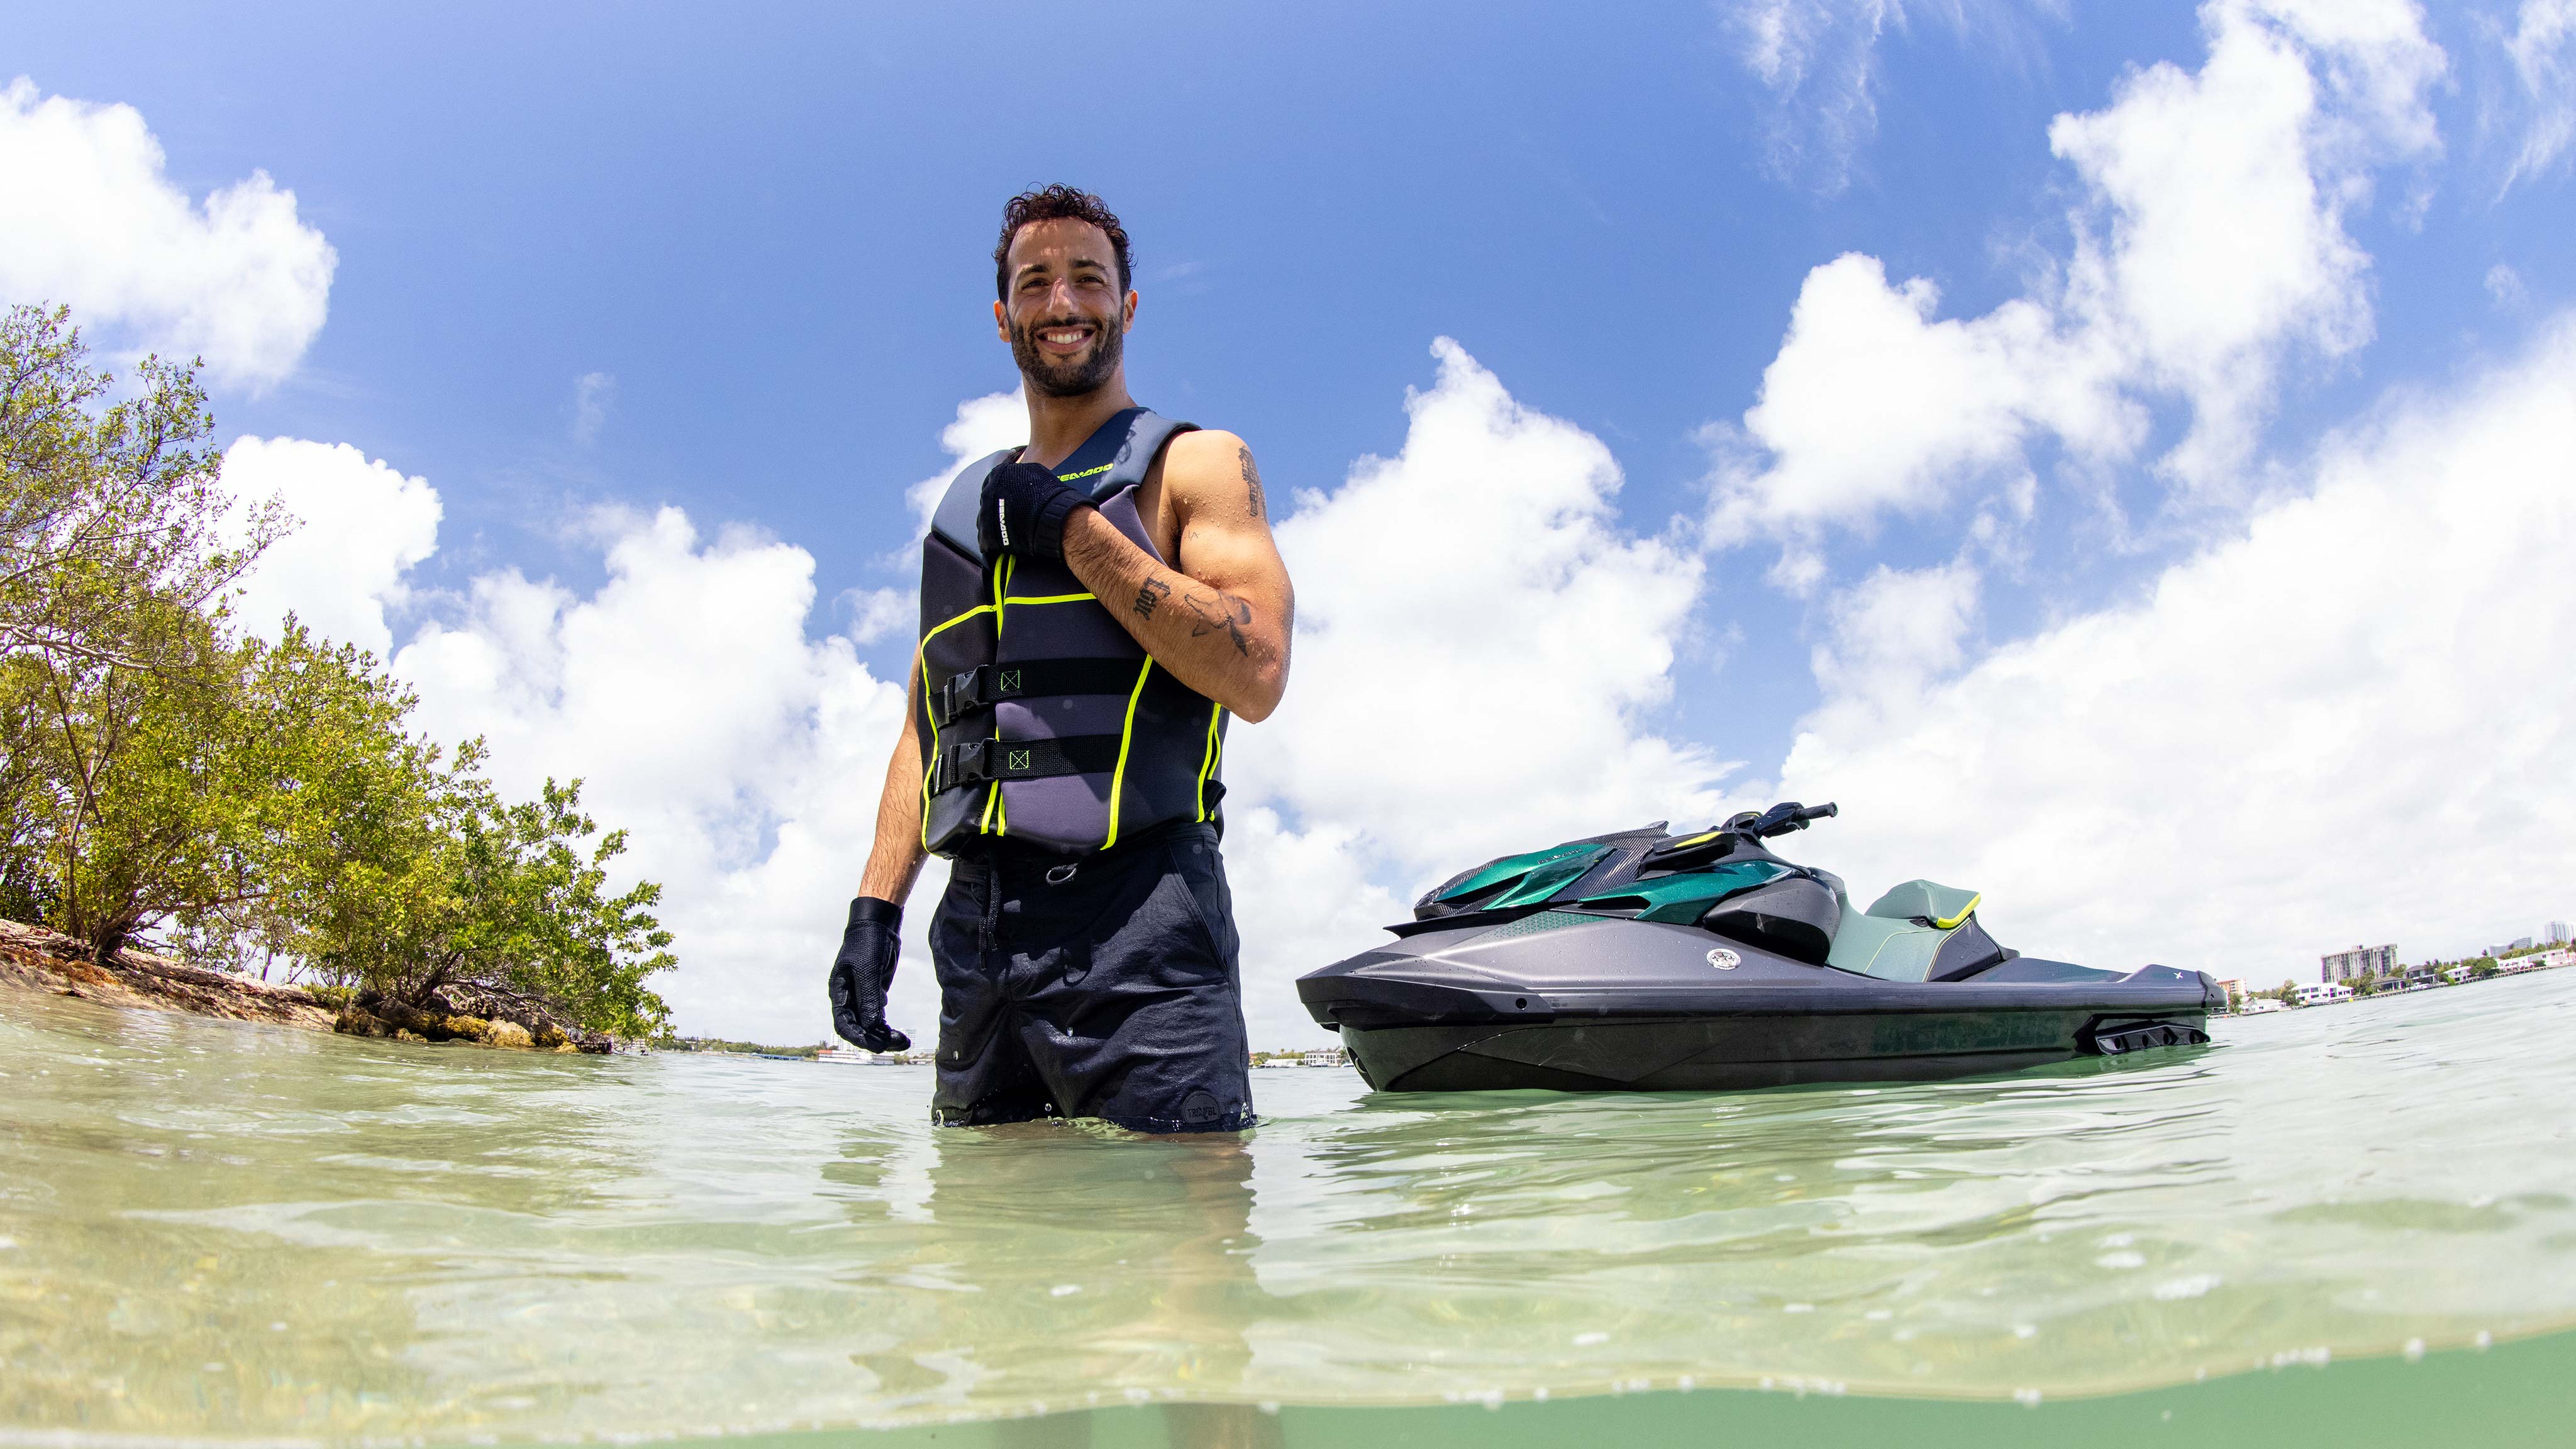 Daniel Ricciardo in the water next to the new exclusive and high performance Sea-Doo personal watercraft